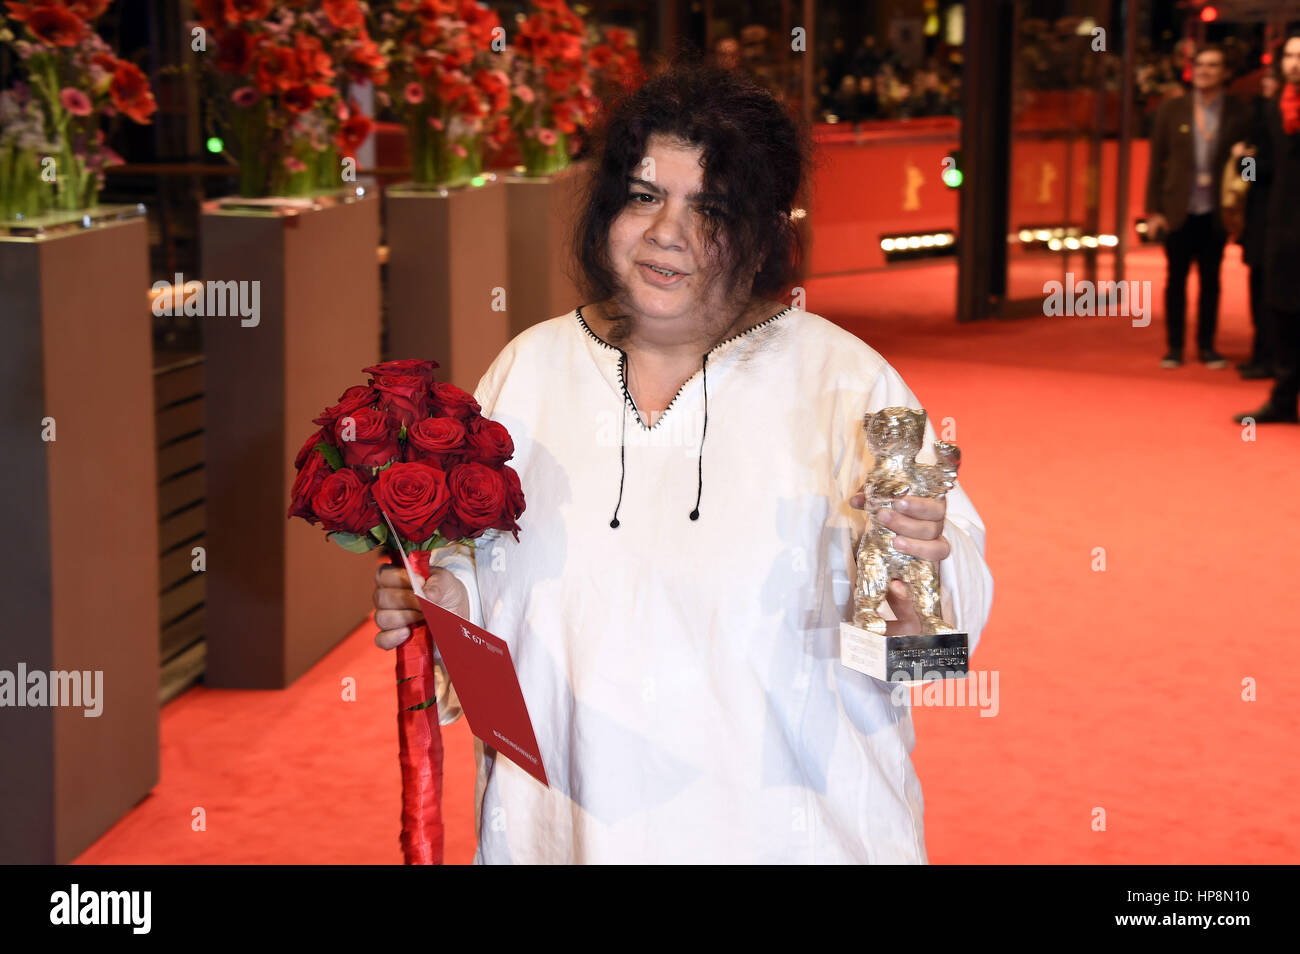 Berlin, Germany. 18th Feb, 2017. Dana Bunescu, winner of the Silver Bear for an Outstanding Artistic Contribution, during the award ceremony at the 67th Berlin International Film Festival/Berlinale 2017 at Berlinale Palast on February 18, 2017 in Berlin, Germany. | usage worldwide Credit: dpa/Alamy Live News Stock Photo